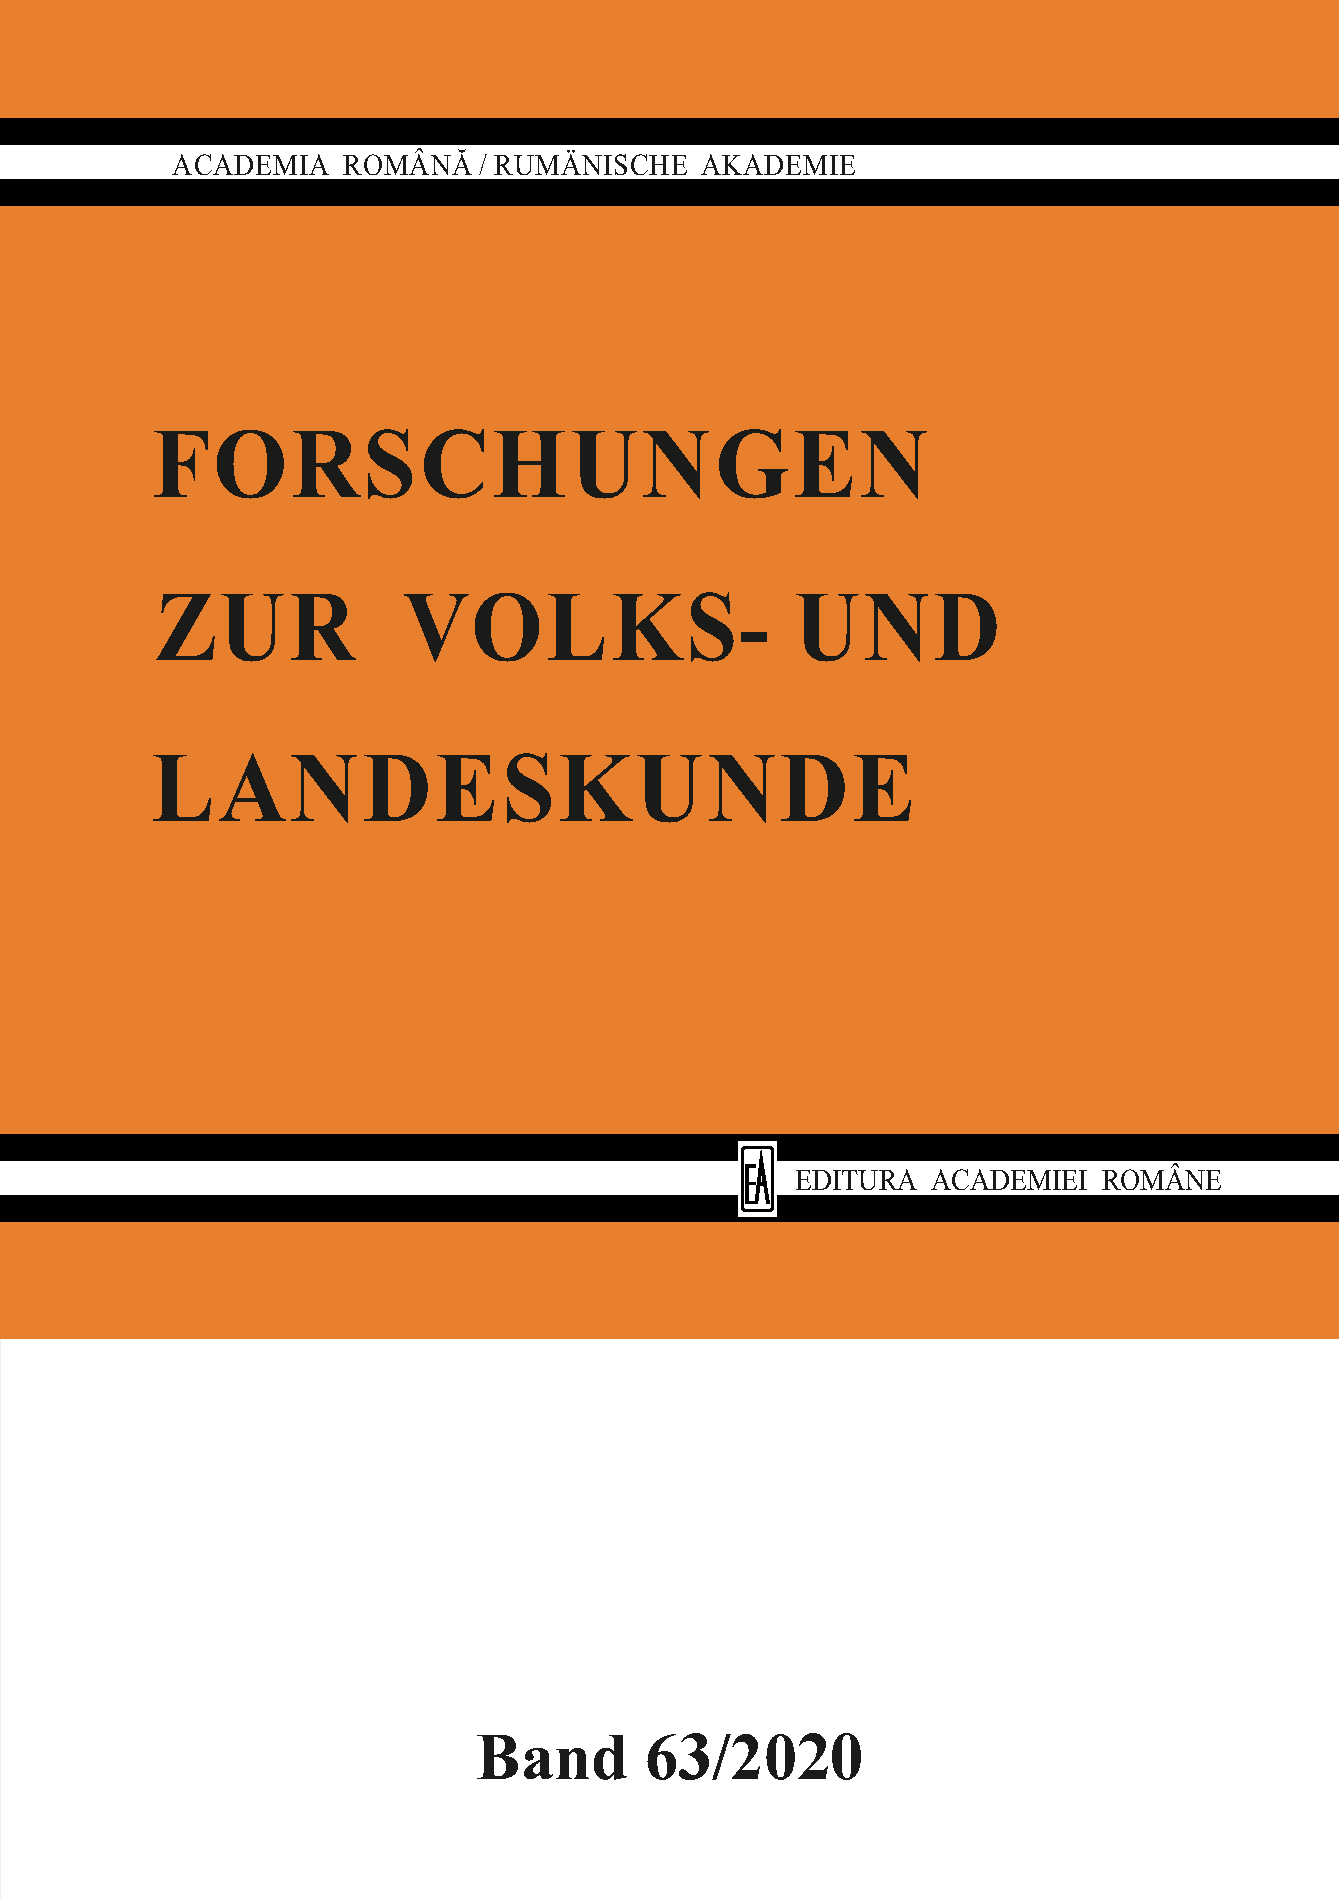 About the Loan Words of Hungarian Origin „Muǝsǝr“and „Katnǝr“ Cover Image